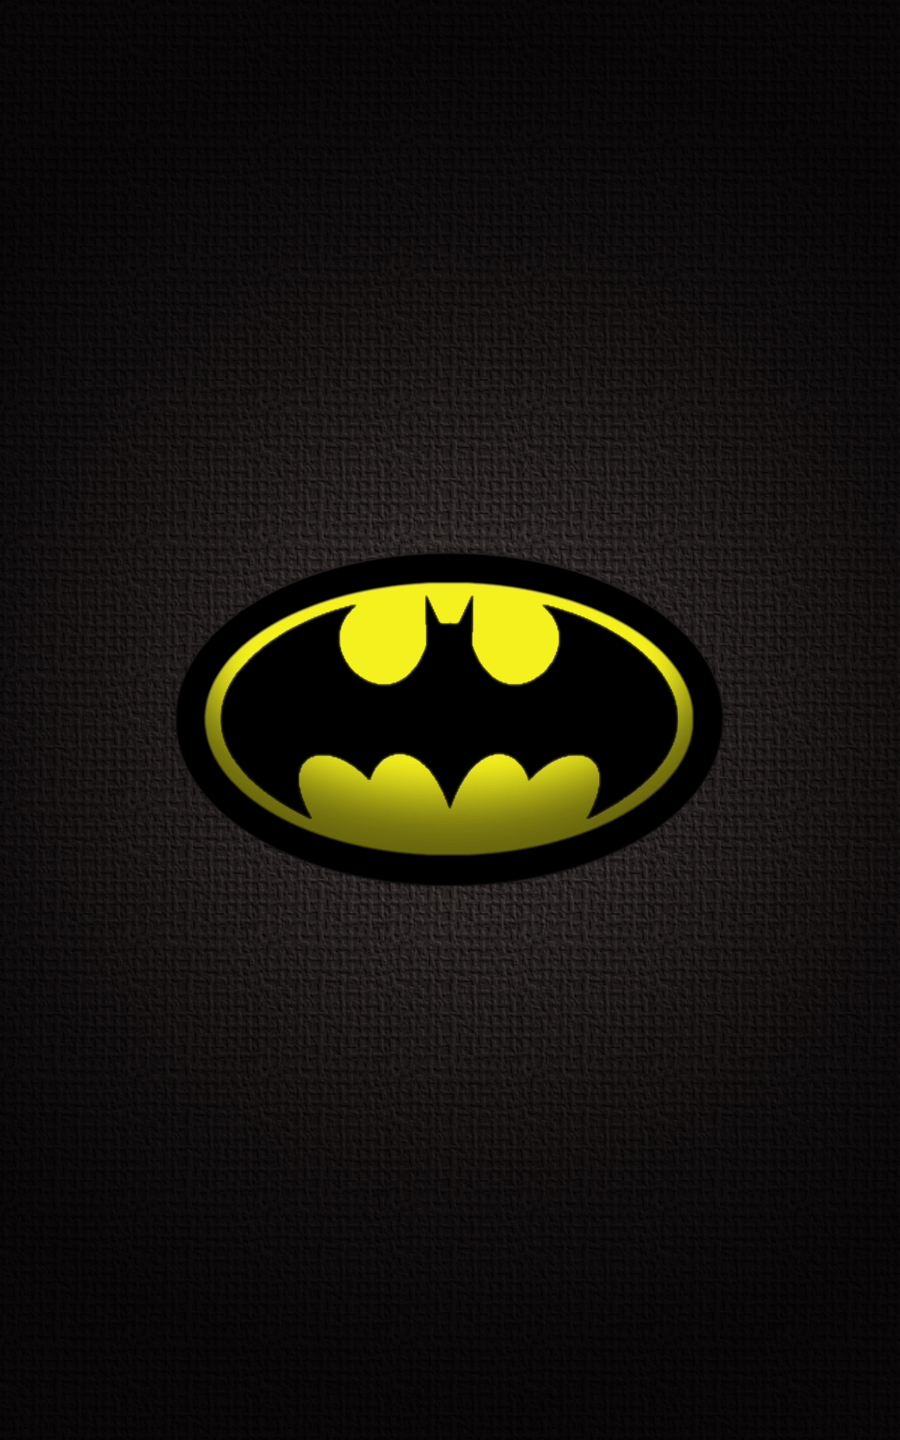 49+] Batman HD Wallpapers for iPhone